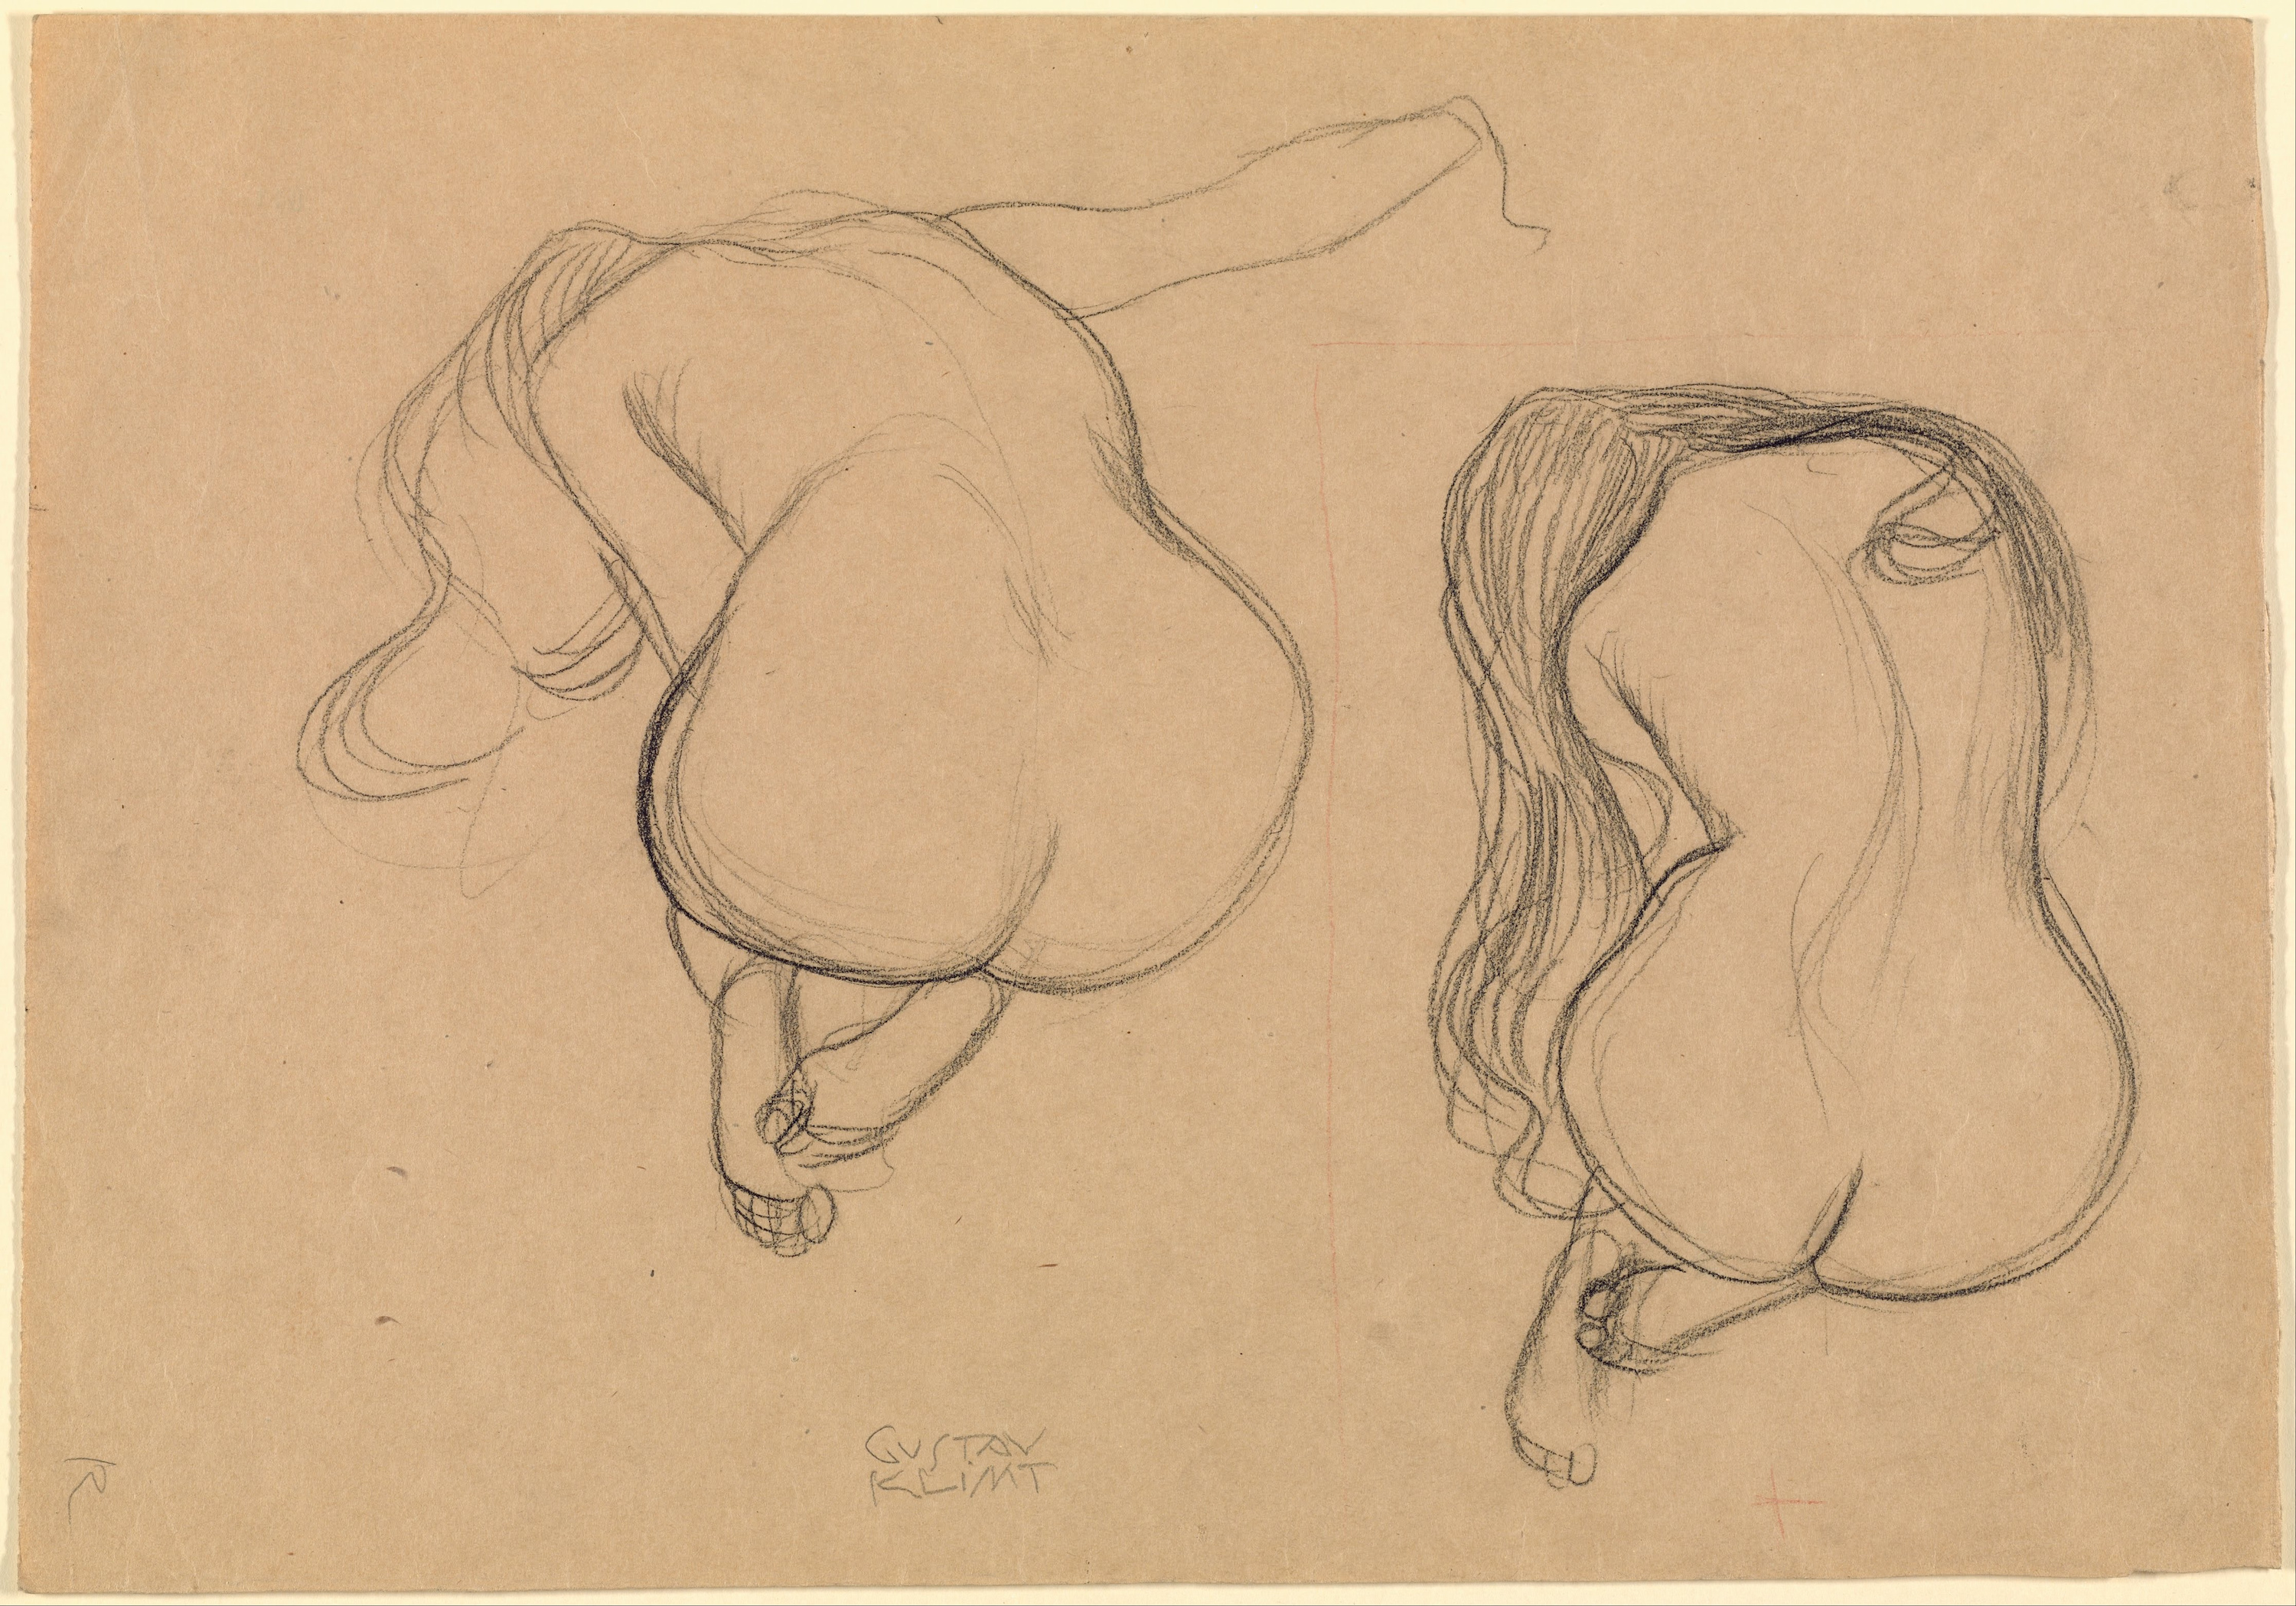 Two Studies of a Seated Nude with Long Hair by Gustav Klimt - 1901-02 - 45.2 x 31.7 cm J. Paul Getty Museum